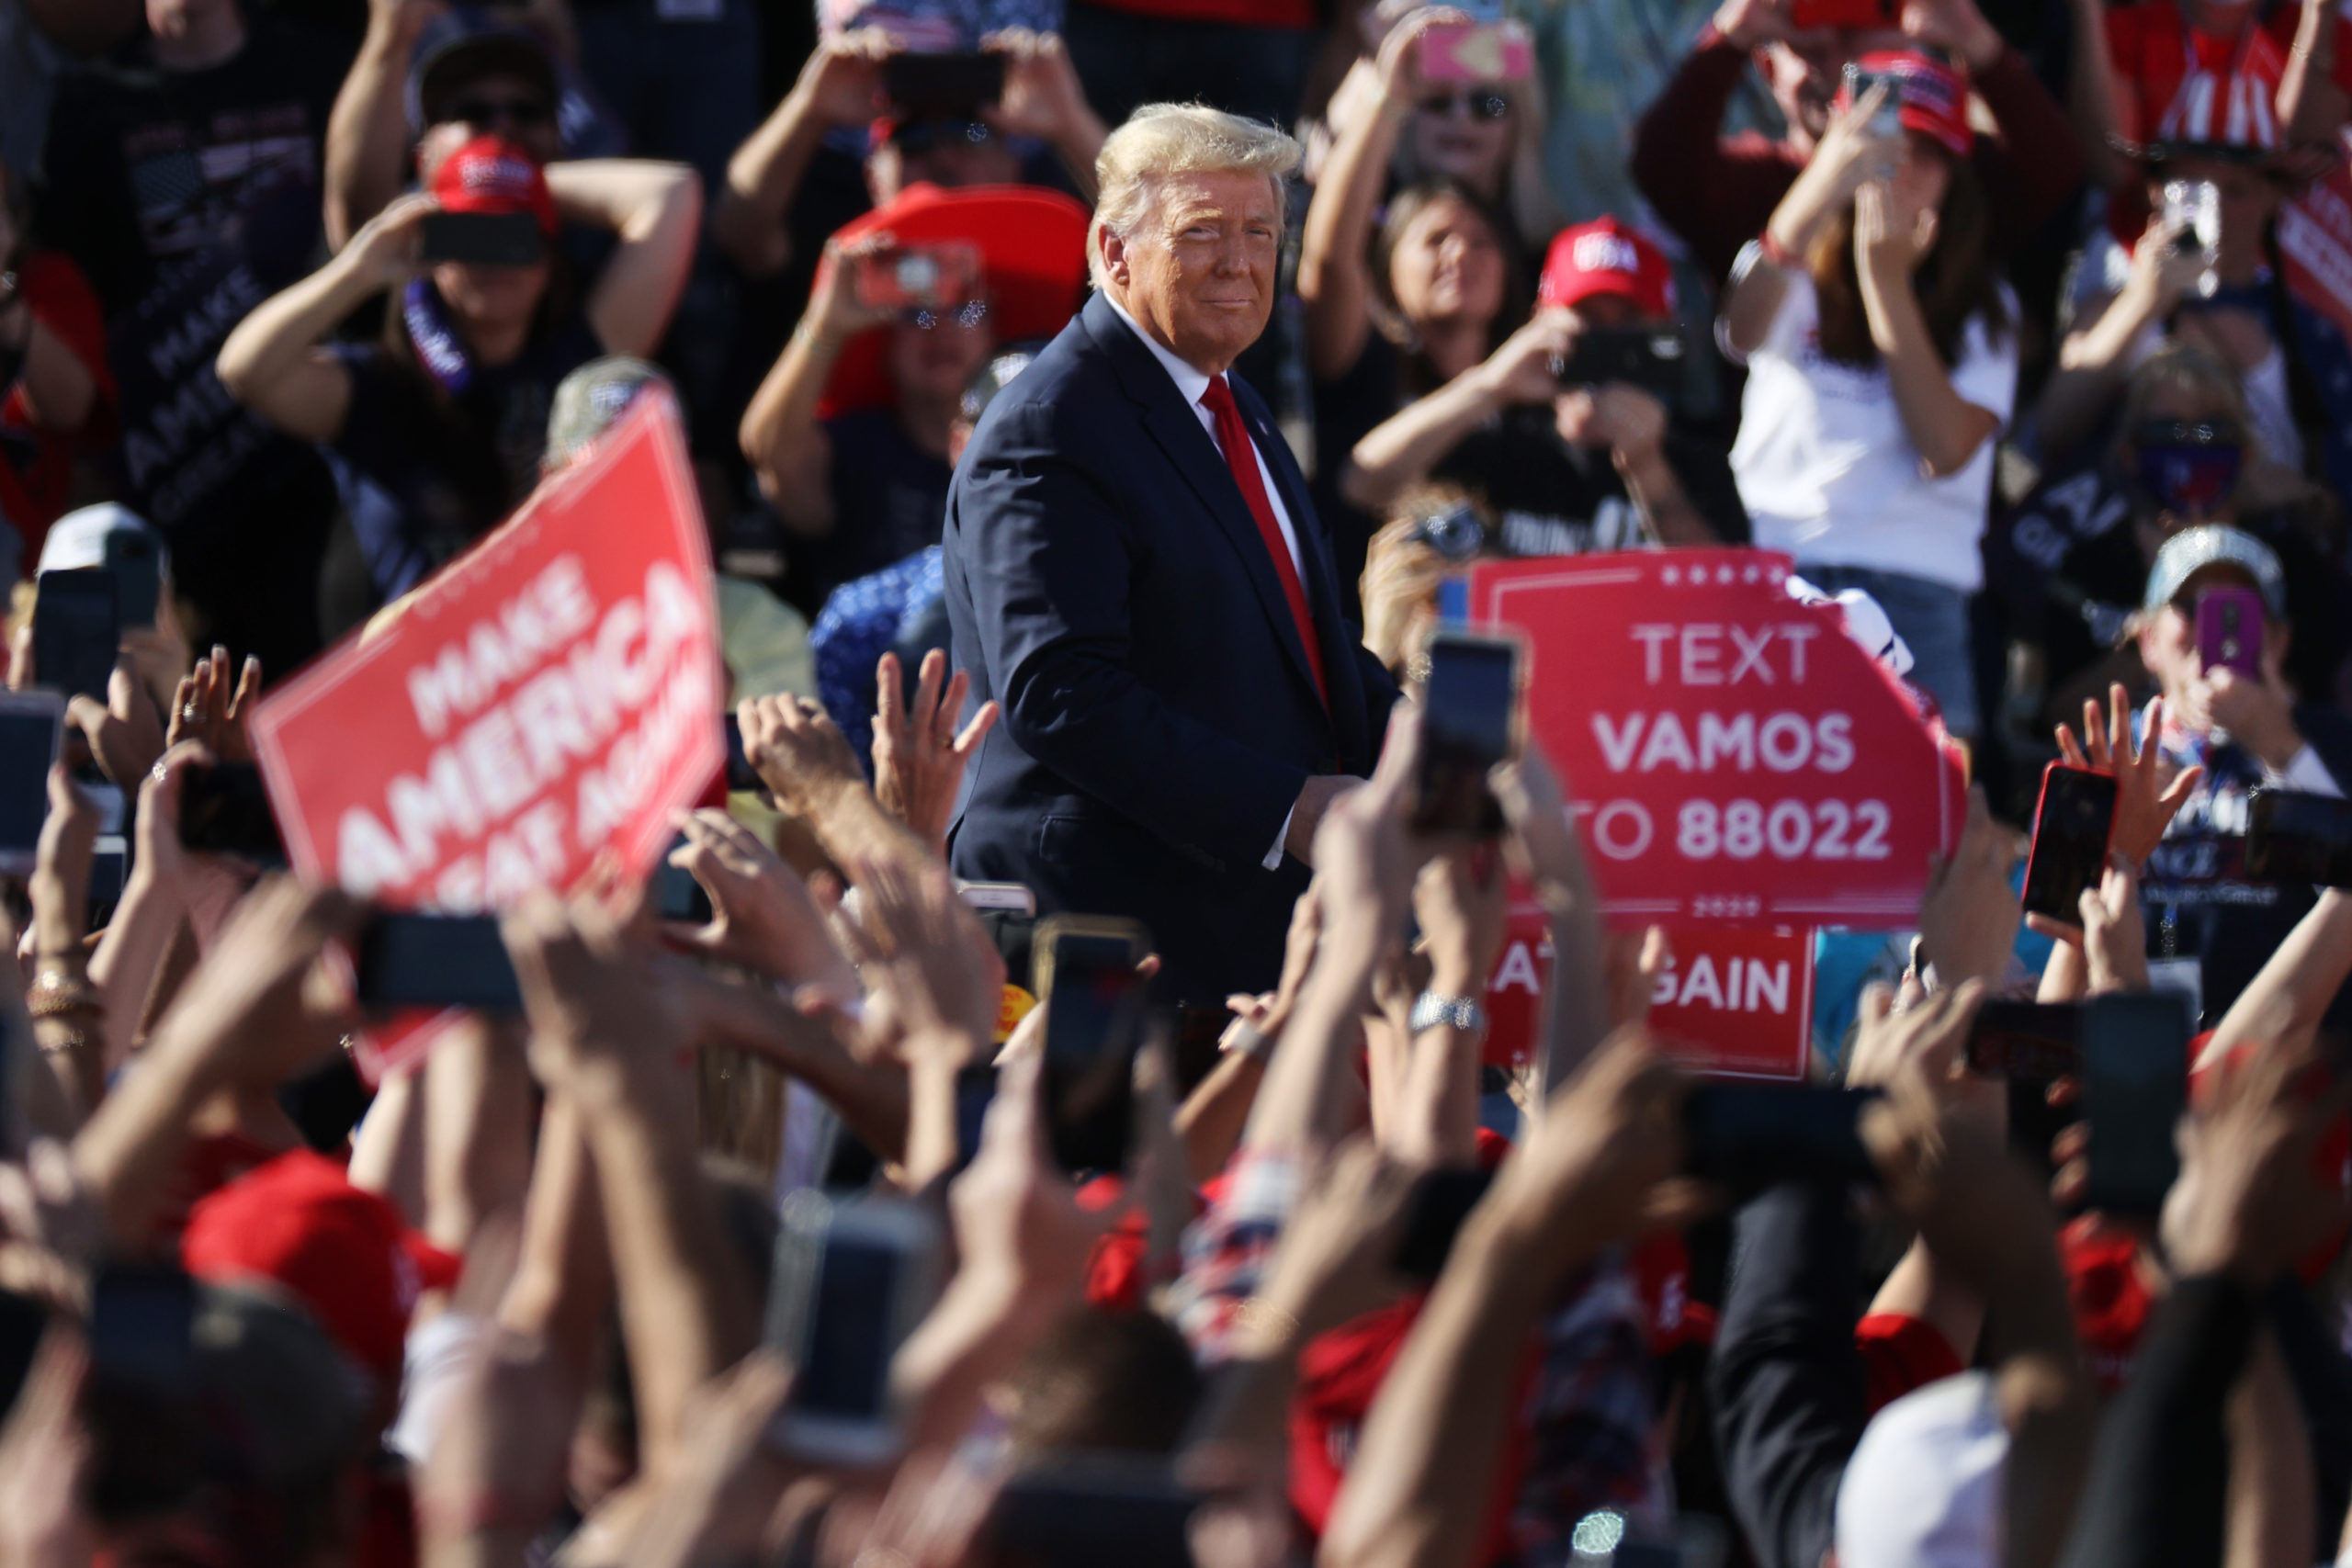 President Donald Trump arrives for a campaign rally at Phoenix Goodyear Airport on Wednesday in Goodyear, Arizona. (Chip Somodevilla/Getty Images)